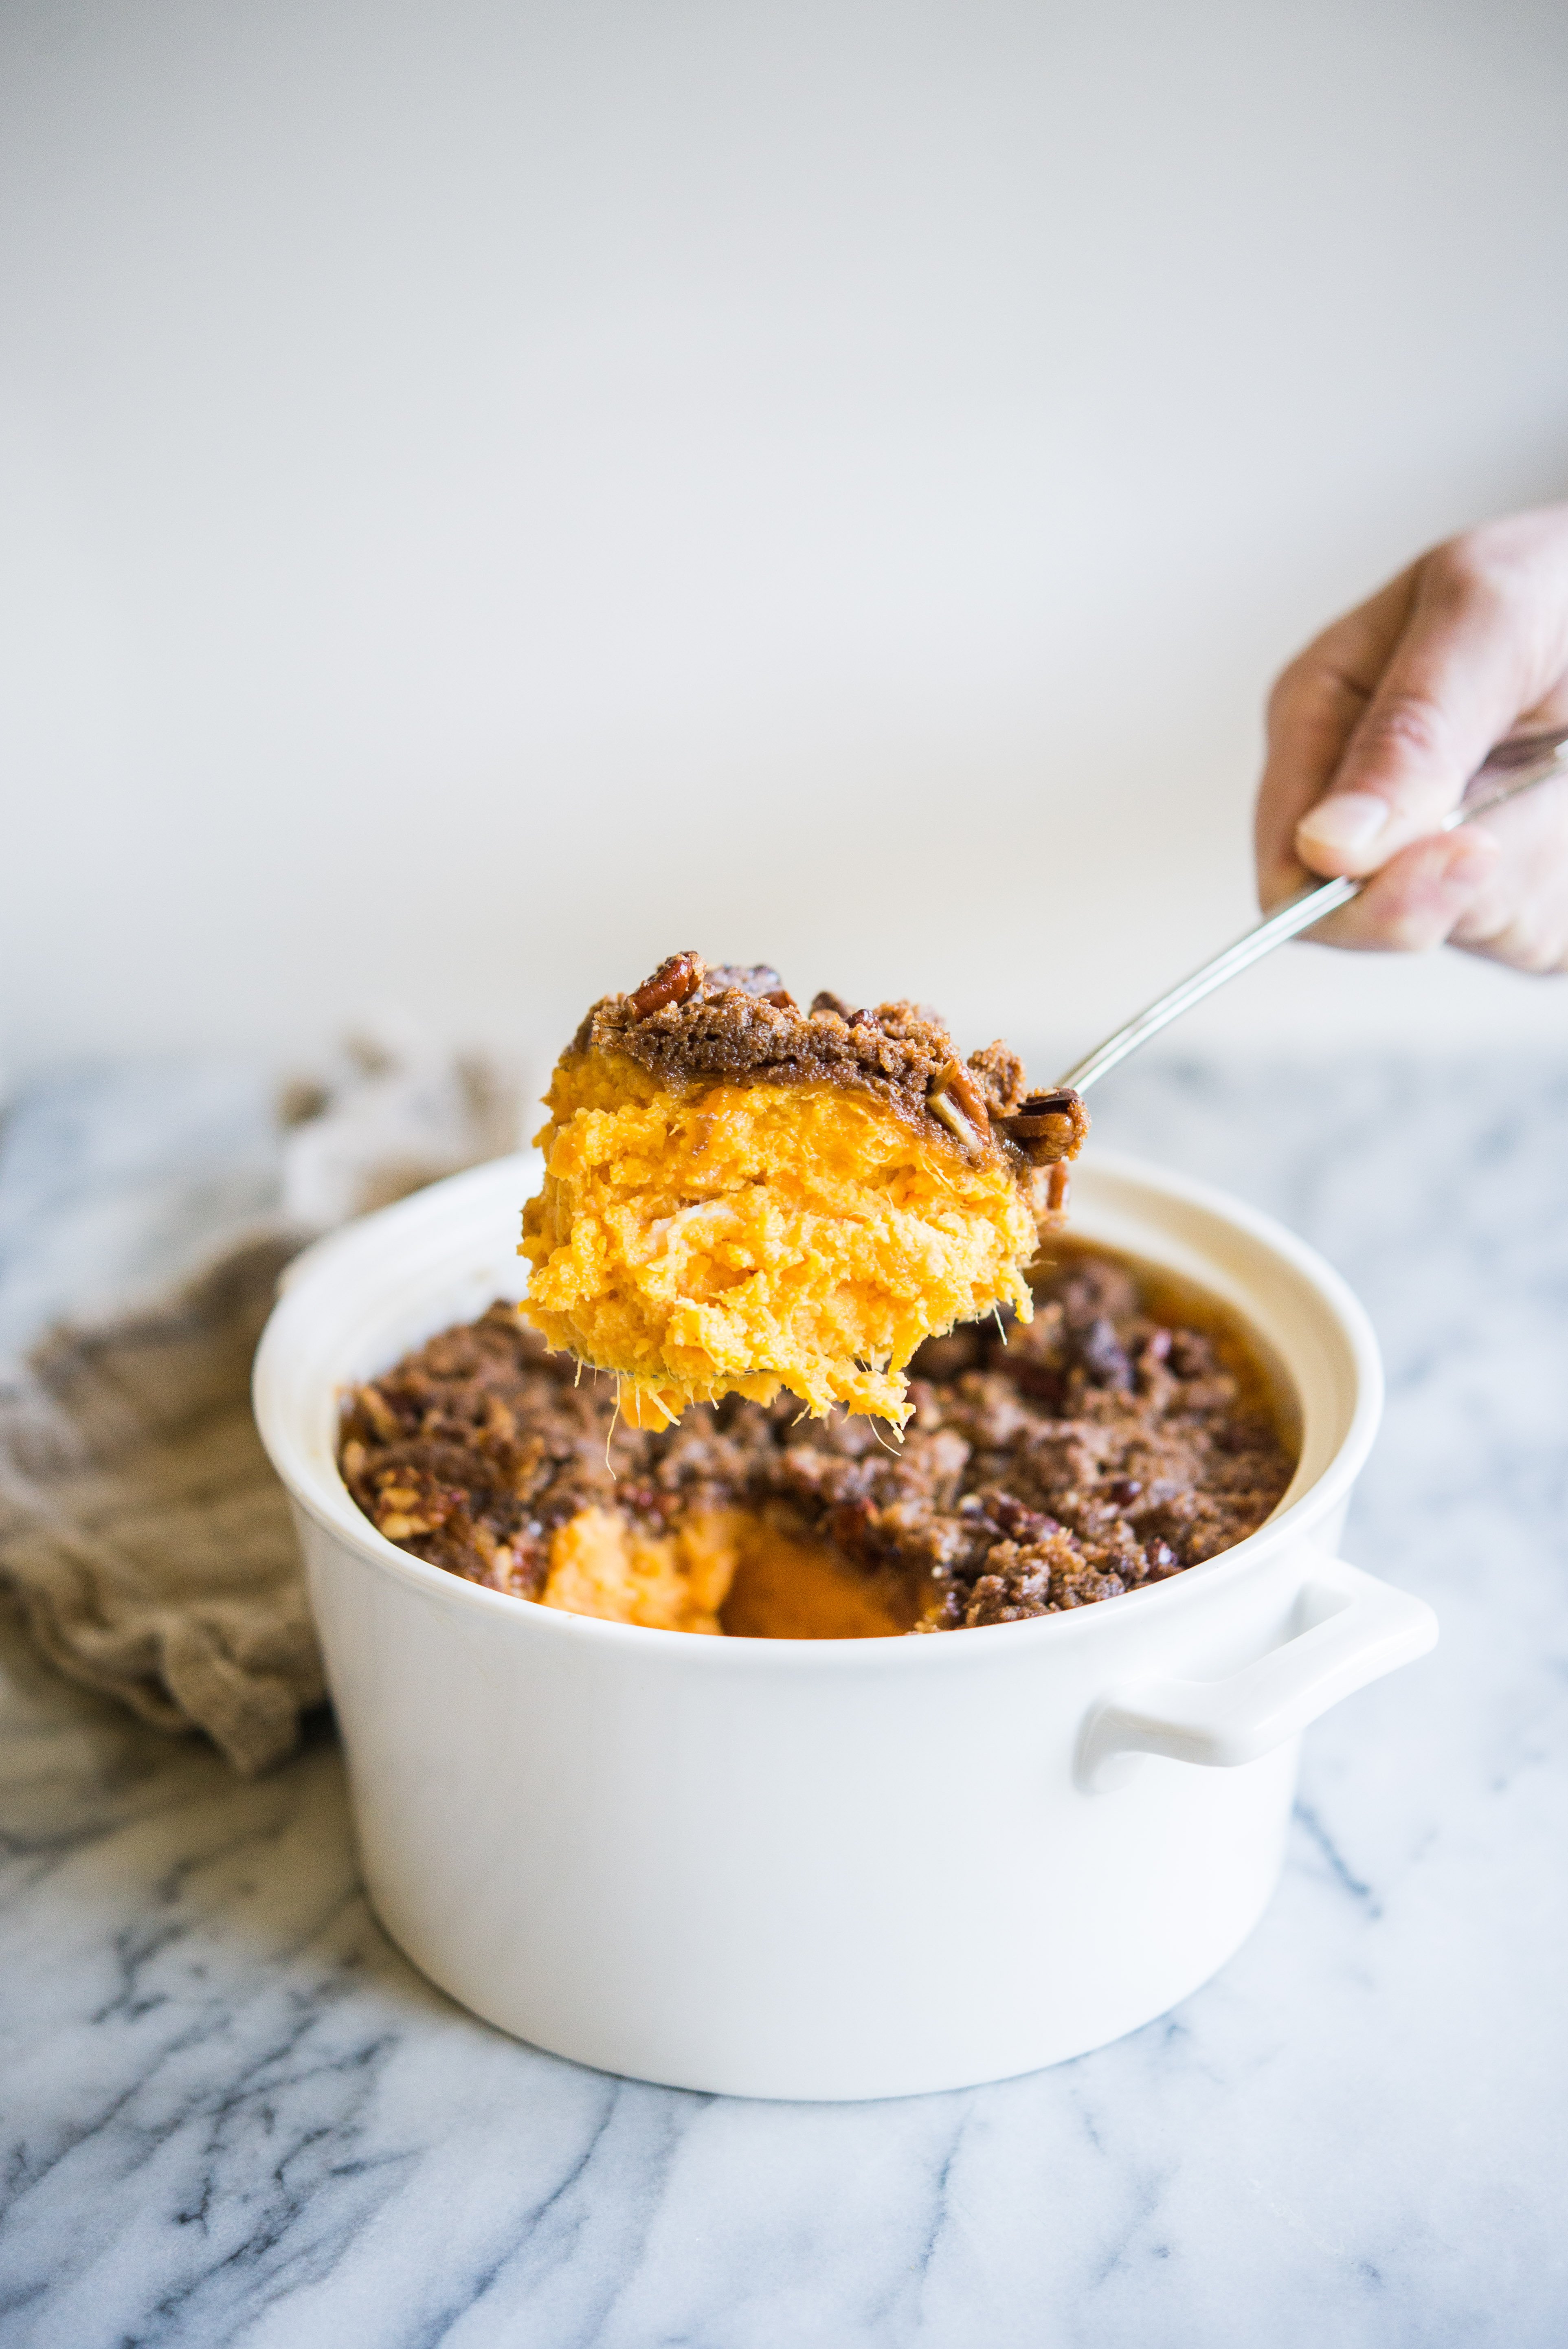 sweet potato casserole with pecans being scooped out of a white casserole dish